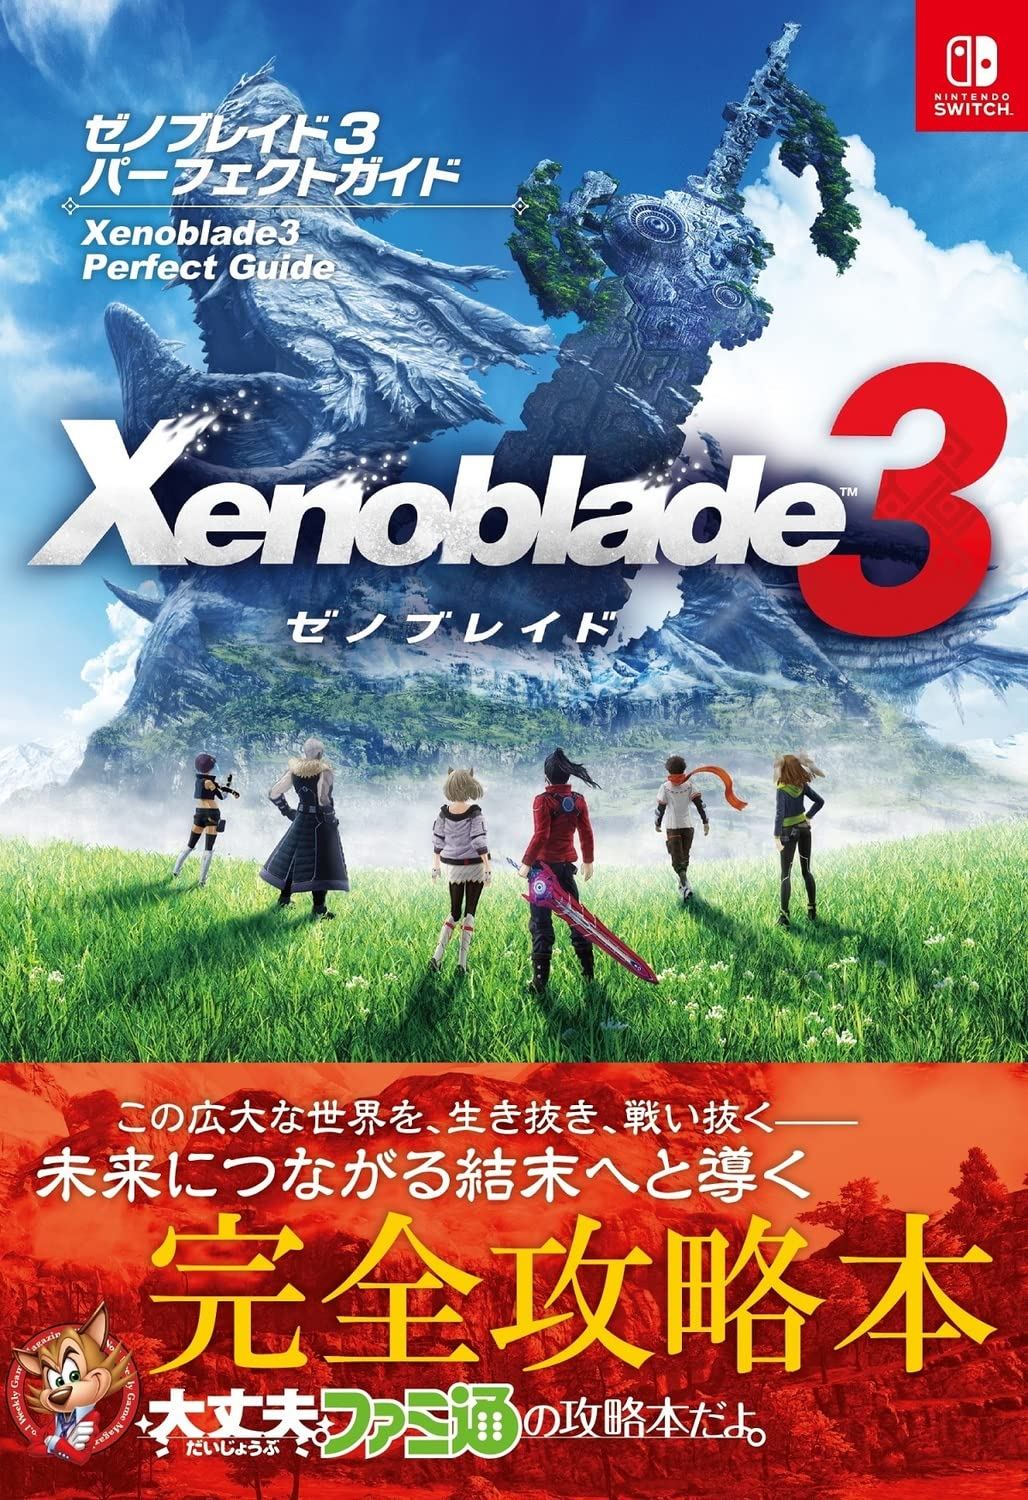 Xenoblade Chronicles 3 Perfect Guide